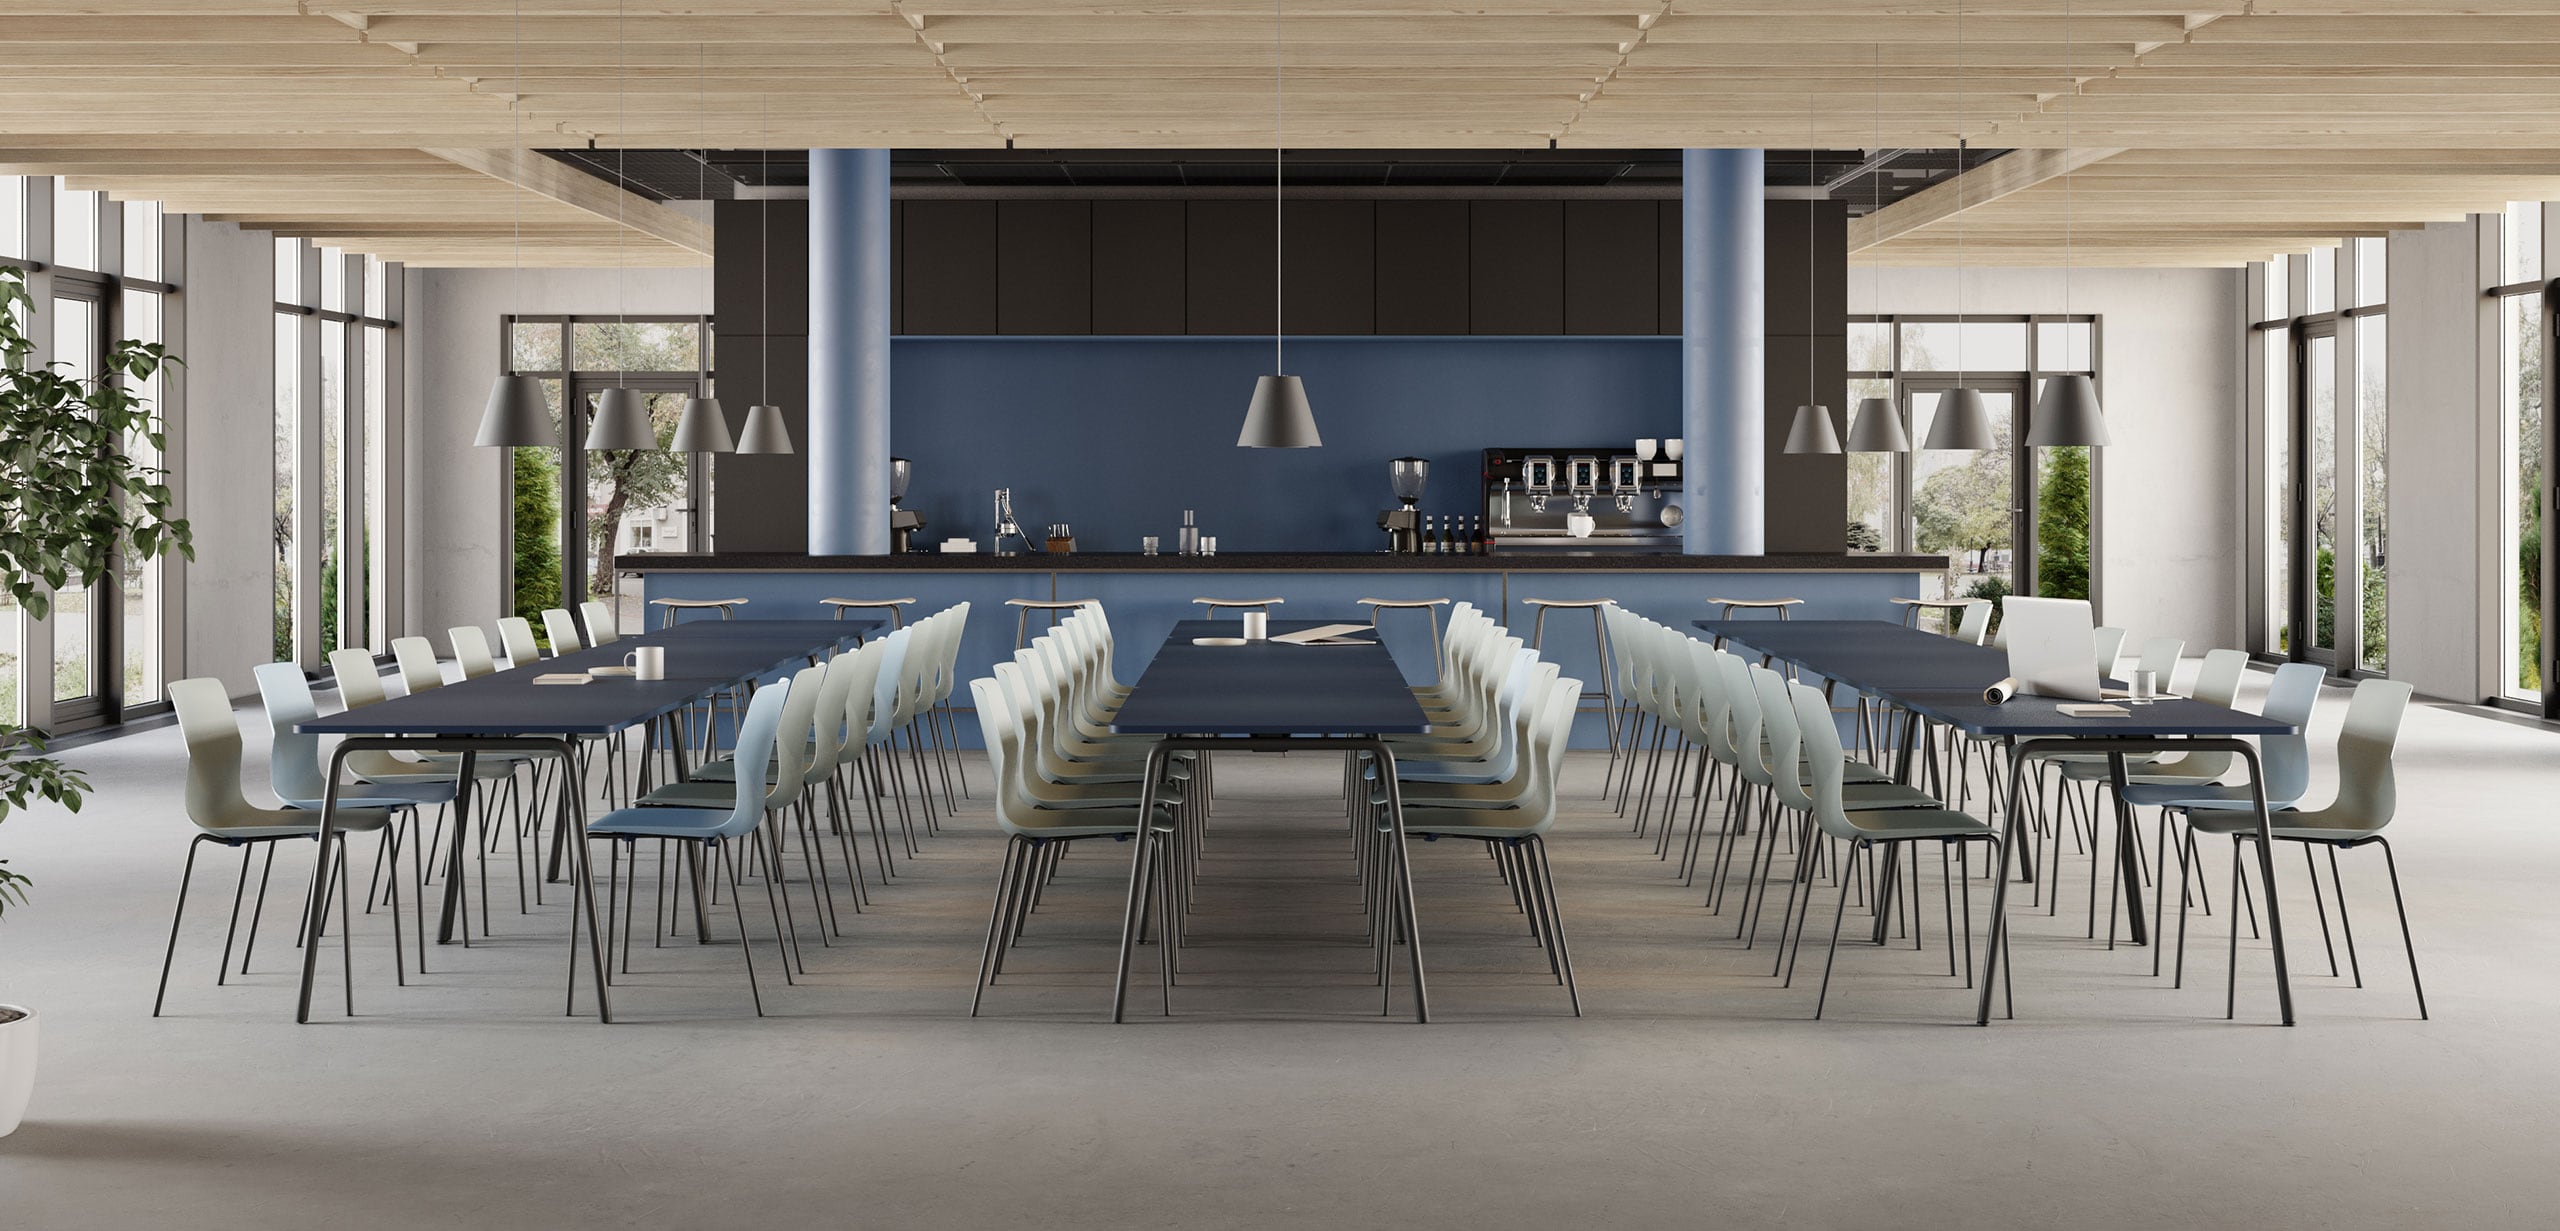 Canteen furniture in a dining room with a long table and chairs.